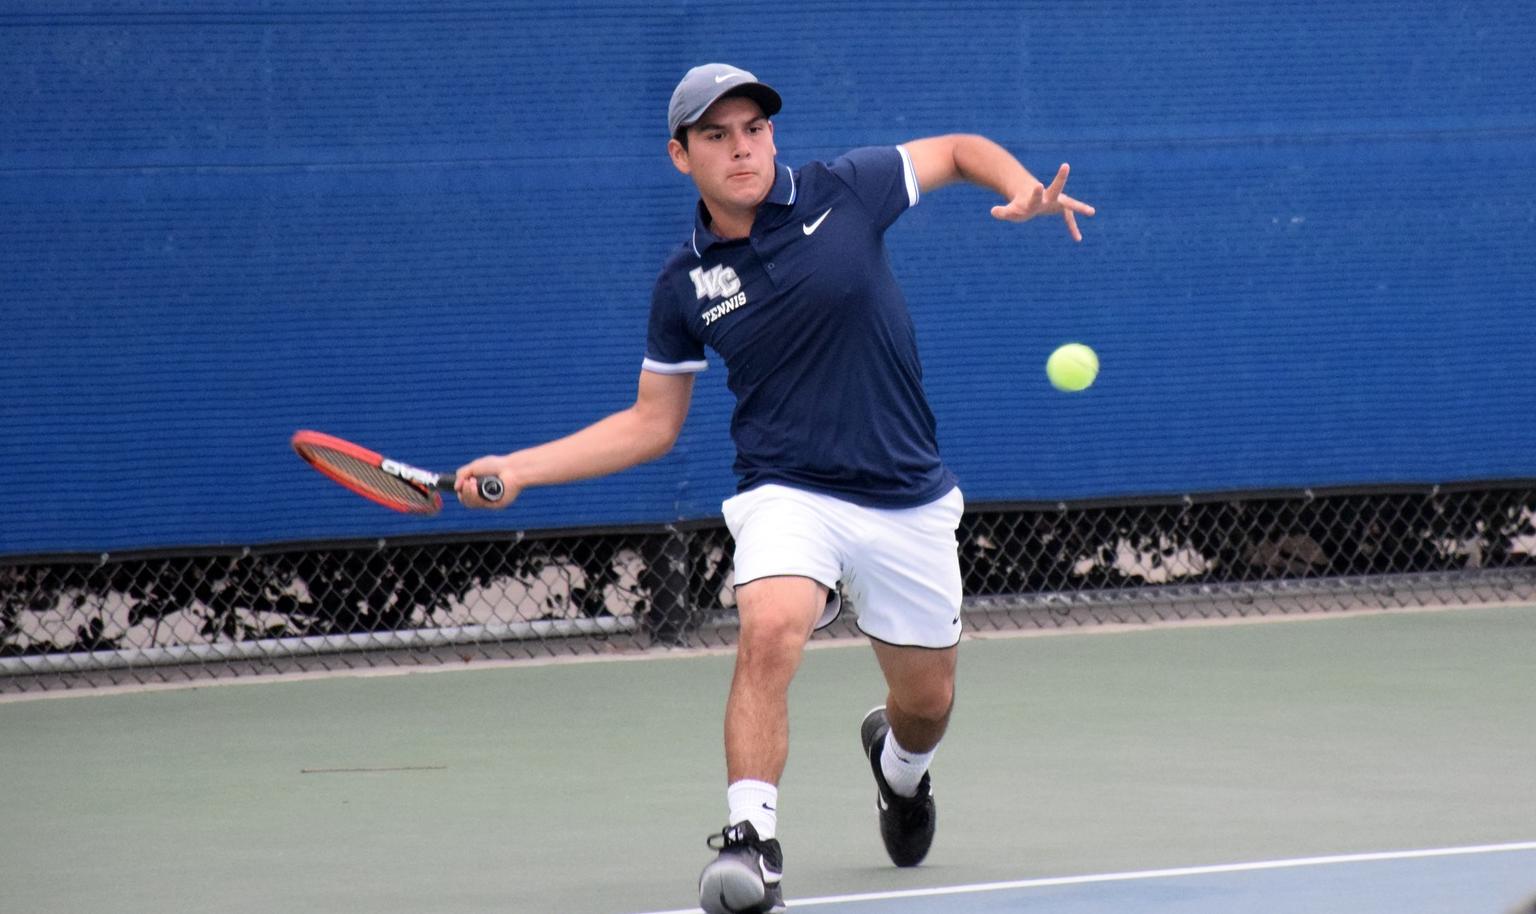 Men's tennis team opens conference play with easy win